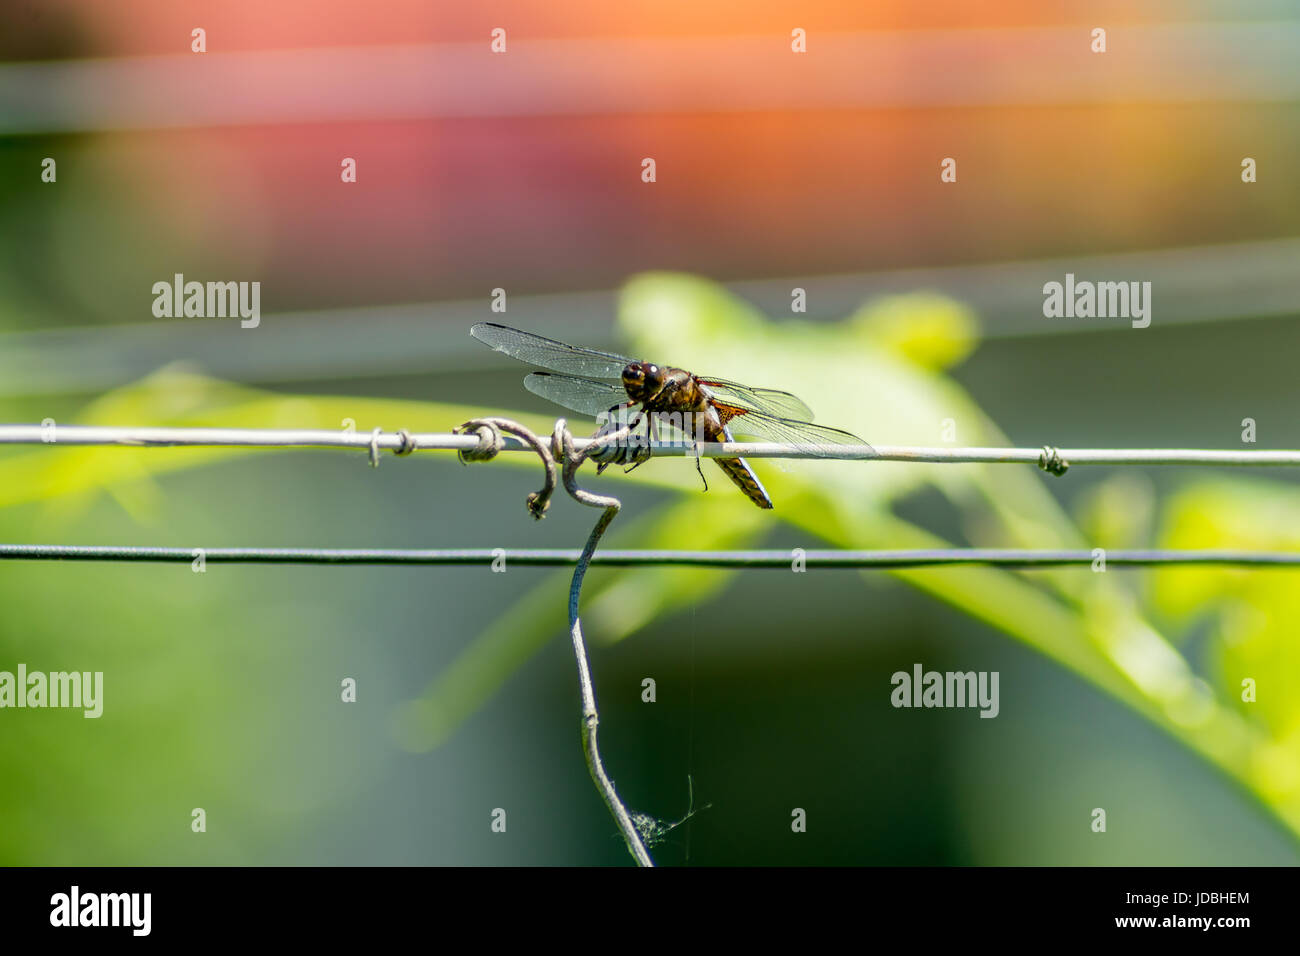 Detail of the dragonfly Libellula Depresa on the fence wire Stock Photo